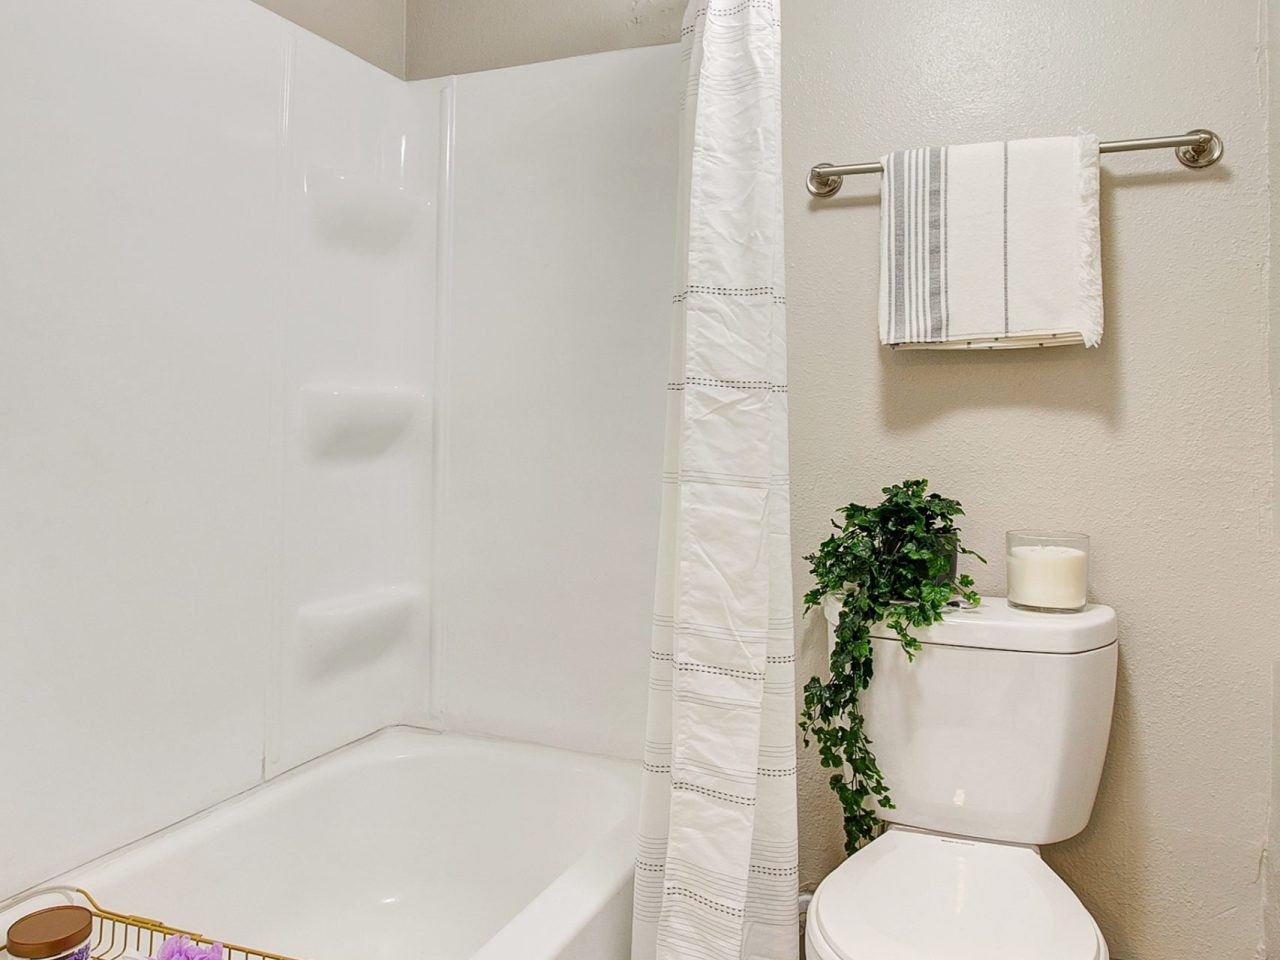 A bathroom with a shower/tub combination, a toilet, and a towel bar.